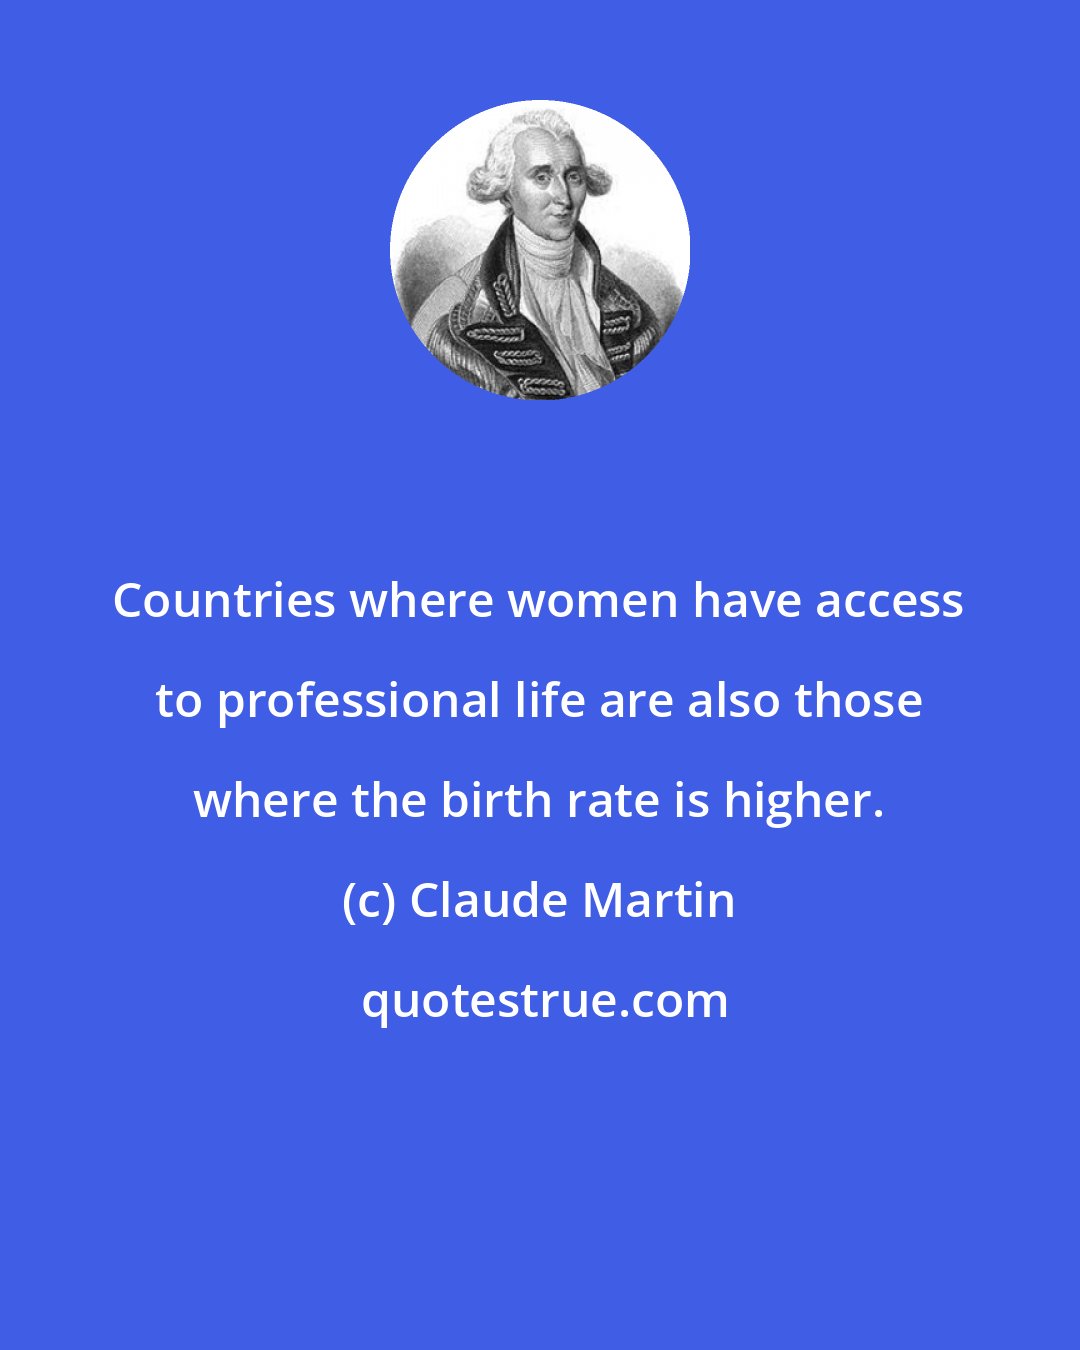 Claude Martin: Countries where women have access to professional life are also those where the birth rate is higher.